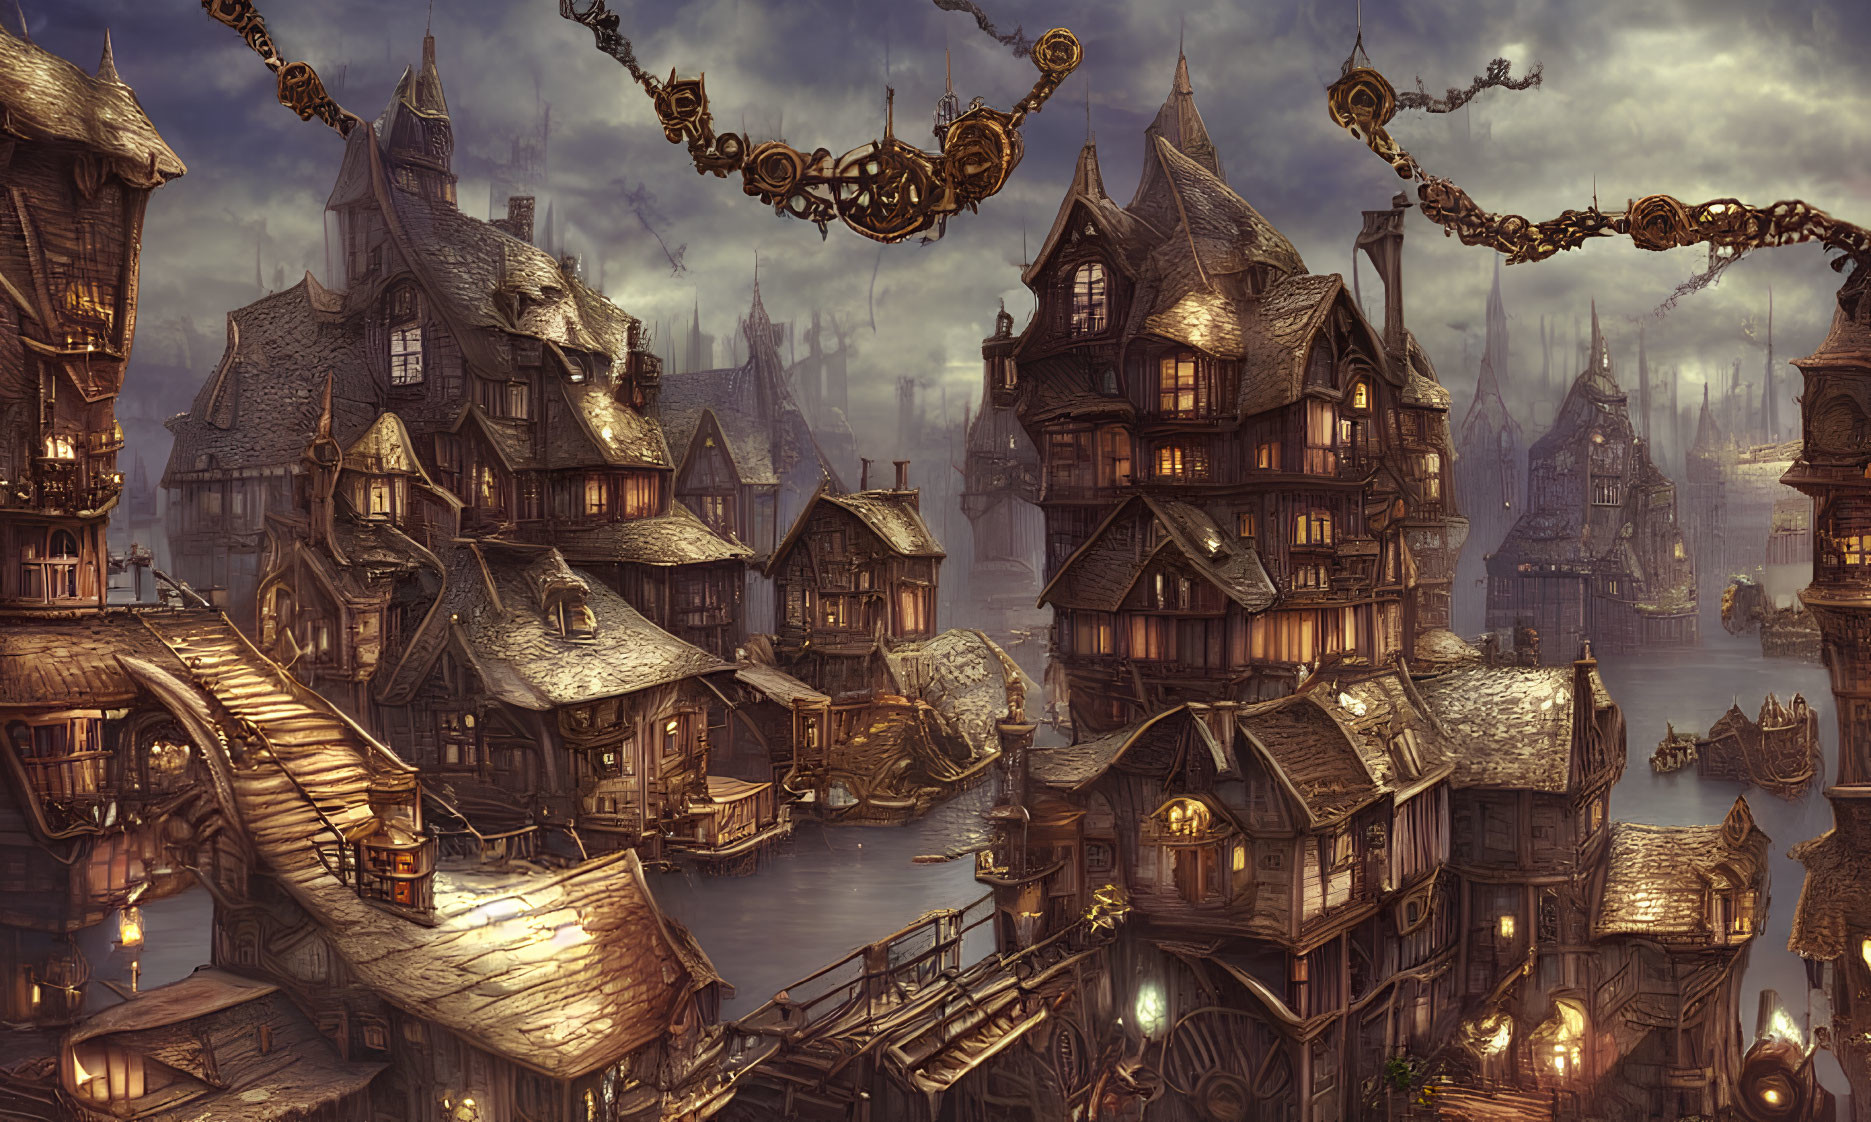 Medieval-style fantasy port city with cobbled streets and golden chains